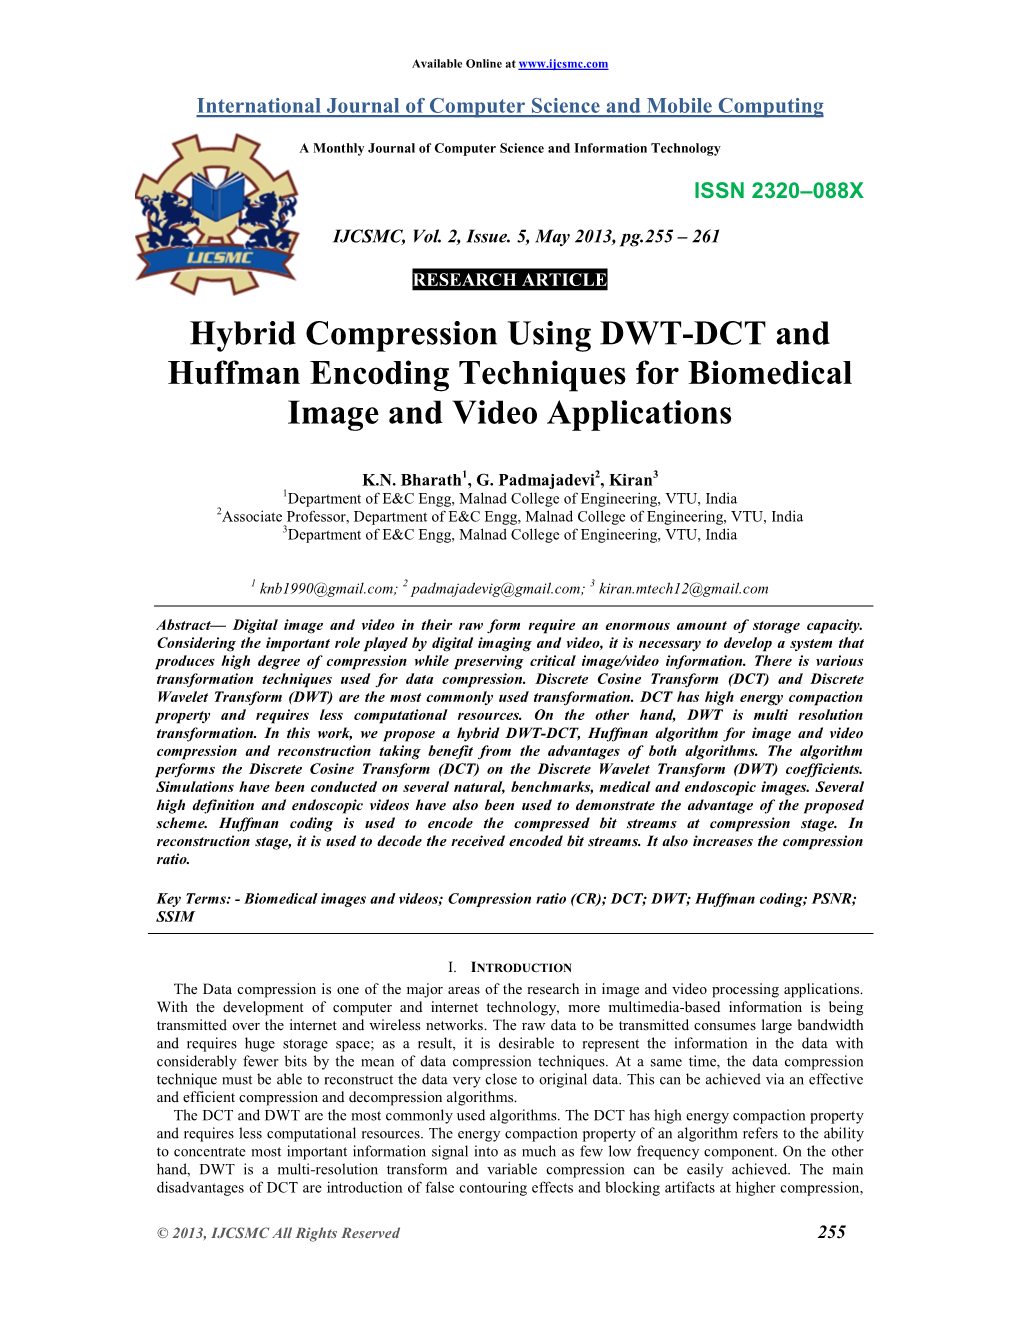 Hybrid Compression Using DWT-DCT and Huffman Encoding Techniques for Biomedical Image and Video Applications